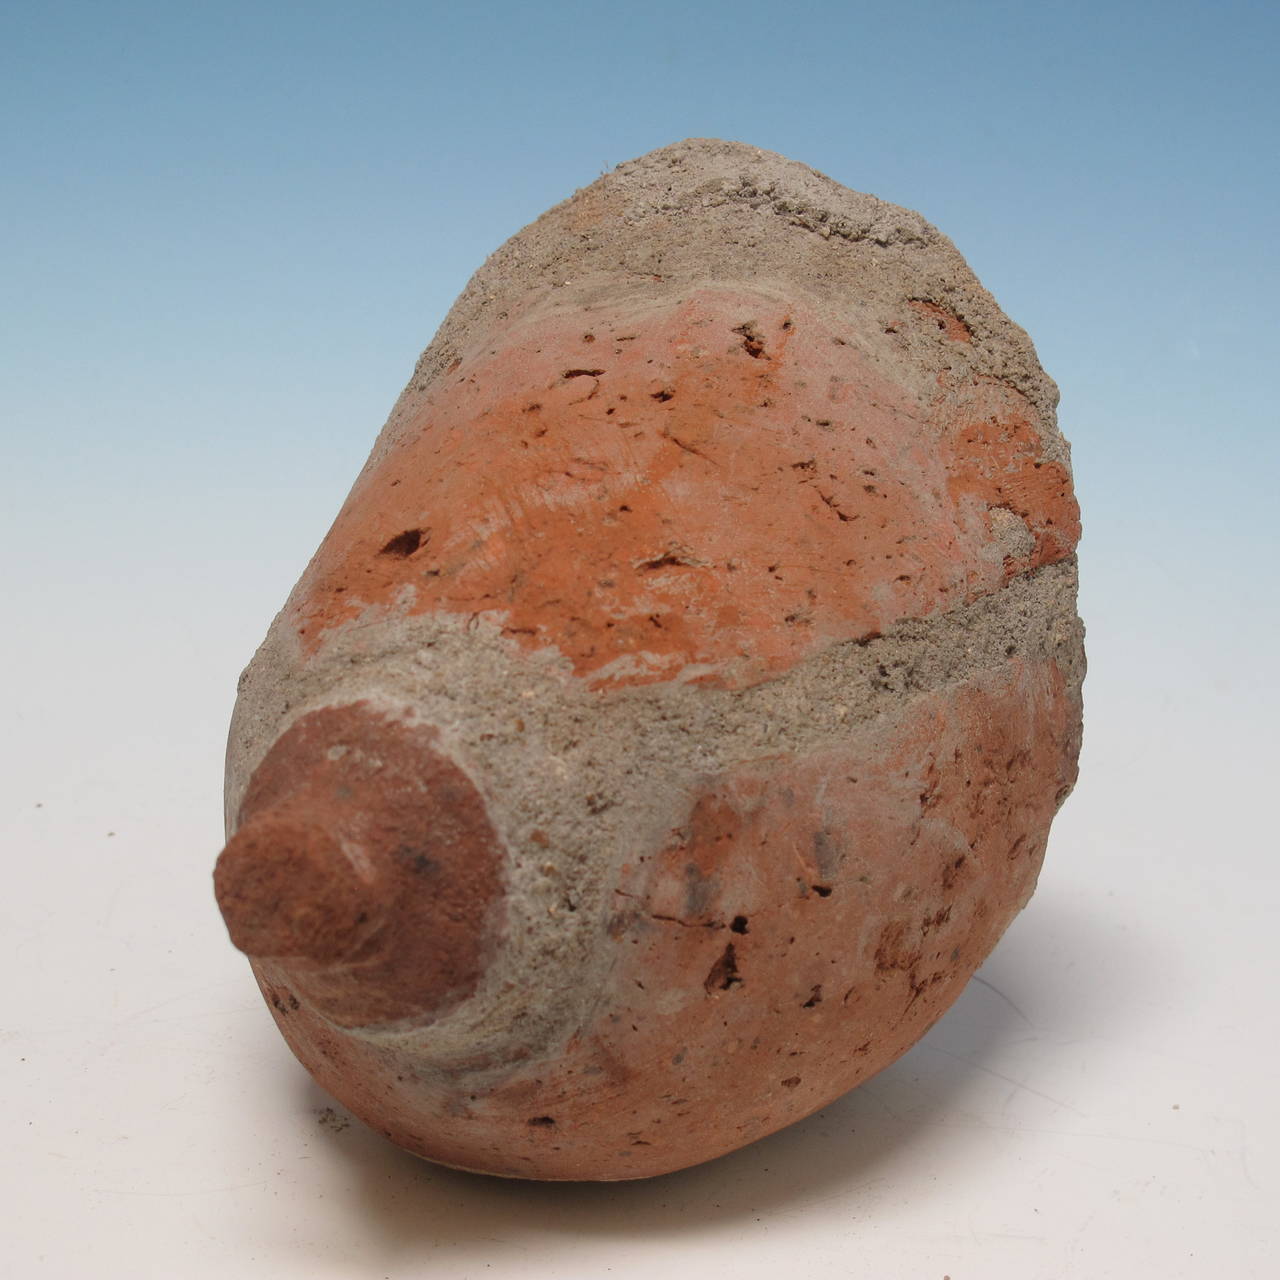 Hoard Jones creates compelling objects from common materials. In this case the breast is carved from hard brick and mortar. The piece comes with a metal Stand which floats it or can be wall-mounted.